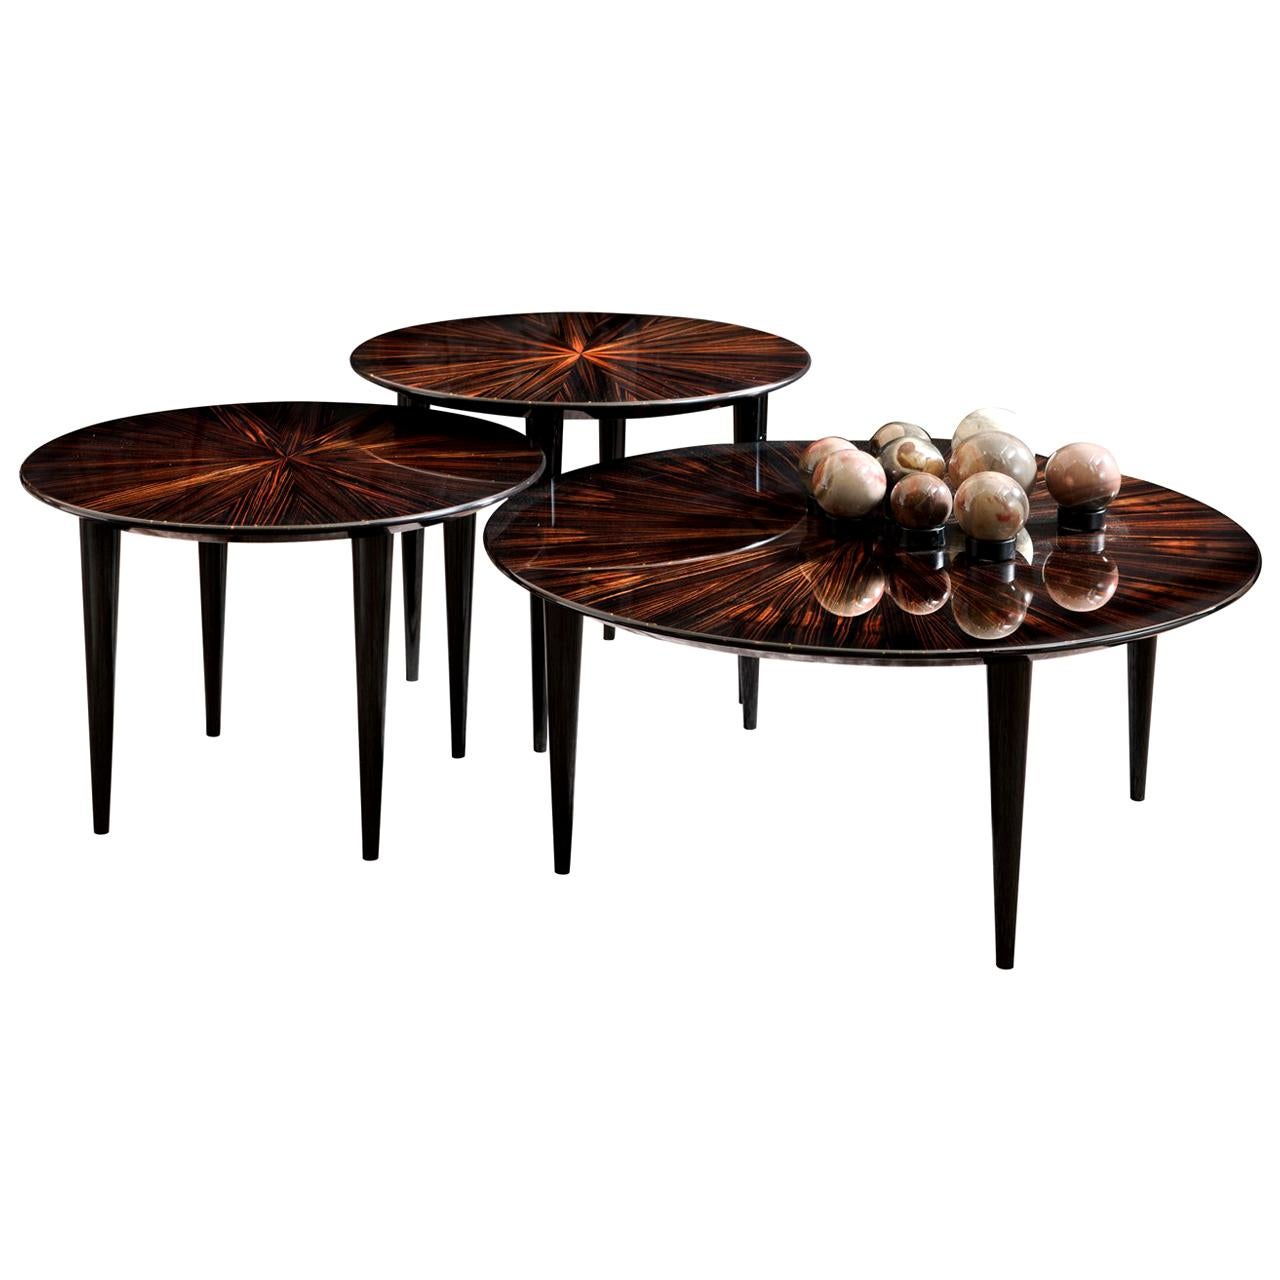 Part of the Pierrot series, this trio of coffee tables boasts exquisite craftsmanship and the use of prized Macassar ebony. The design of each piece, inspired by the romantic flair of the renowned French mask from which it takes its inspiration, is